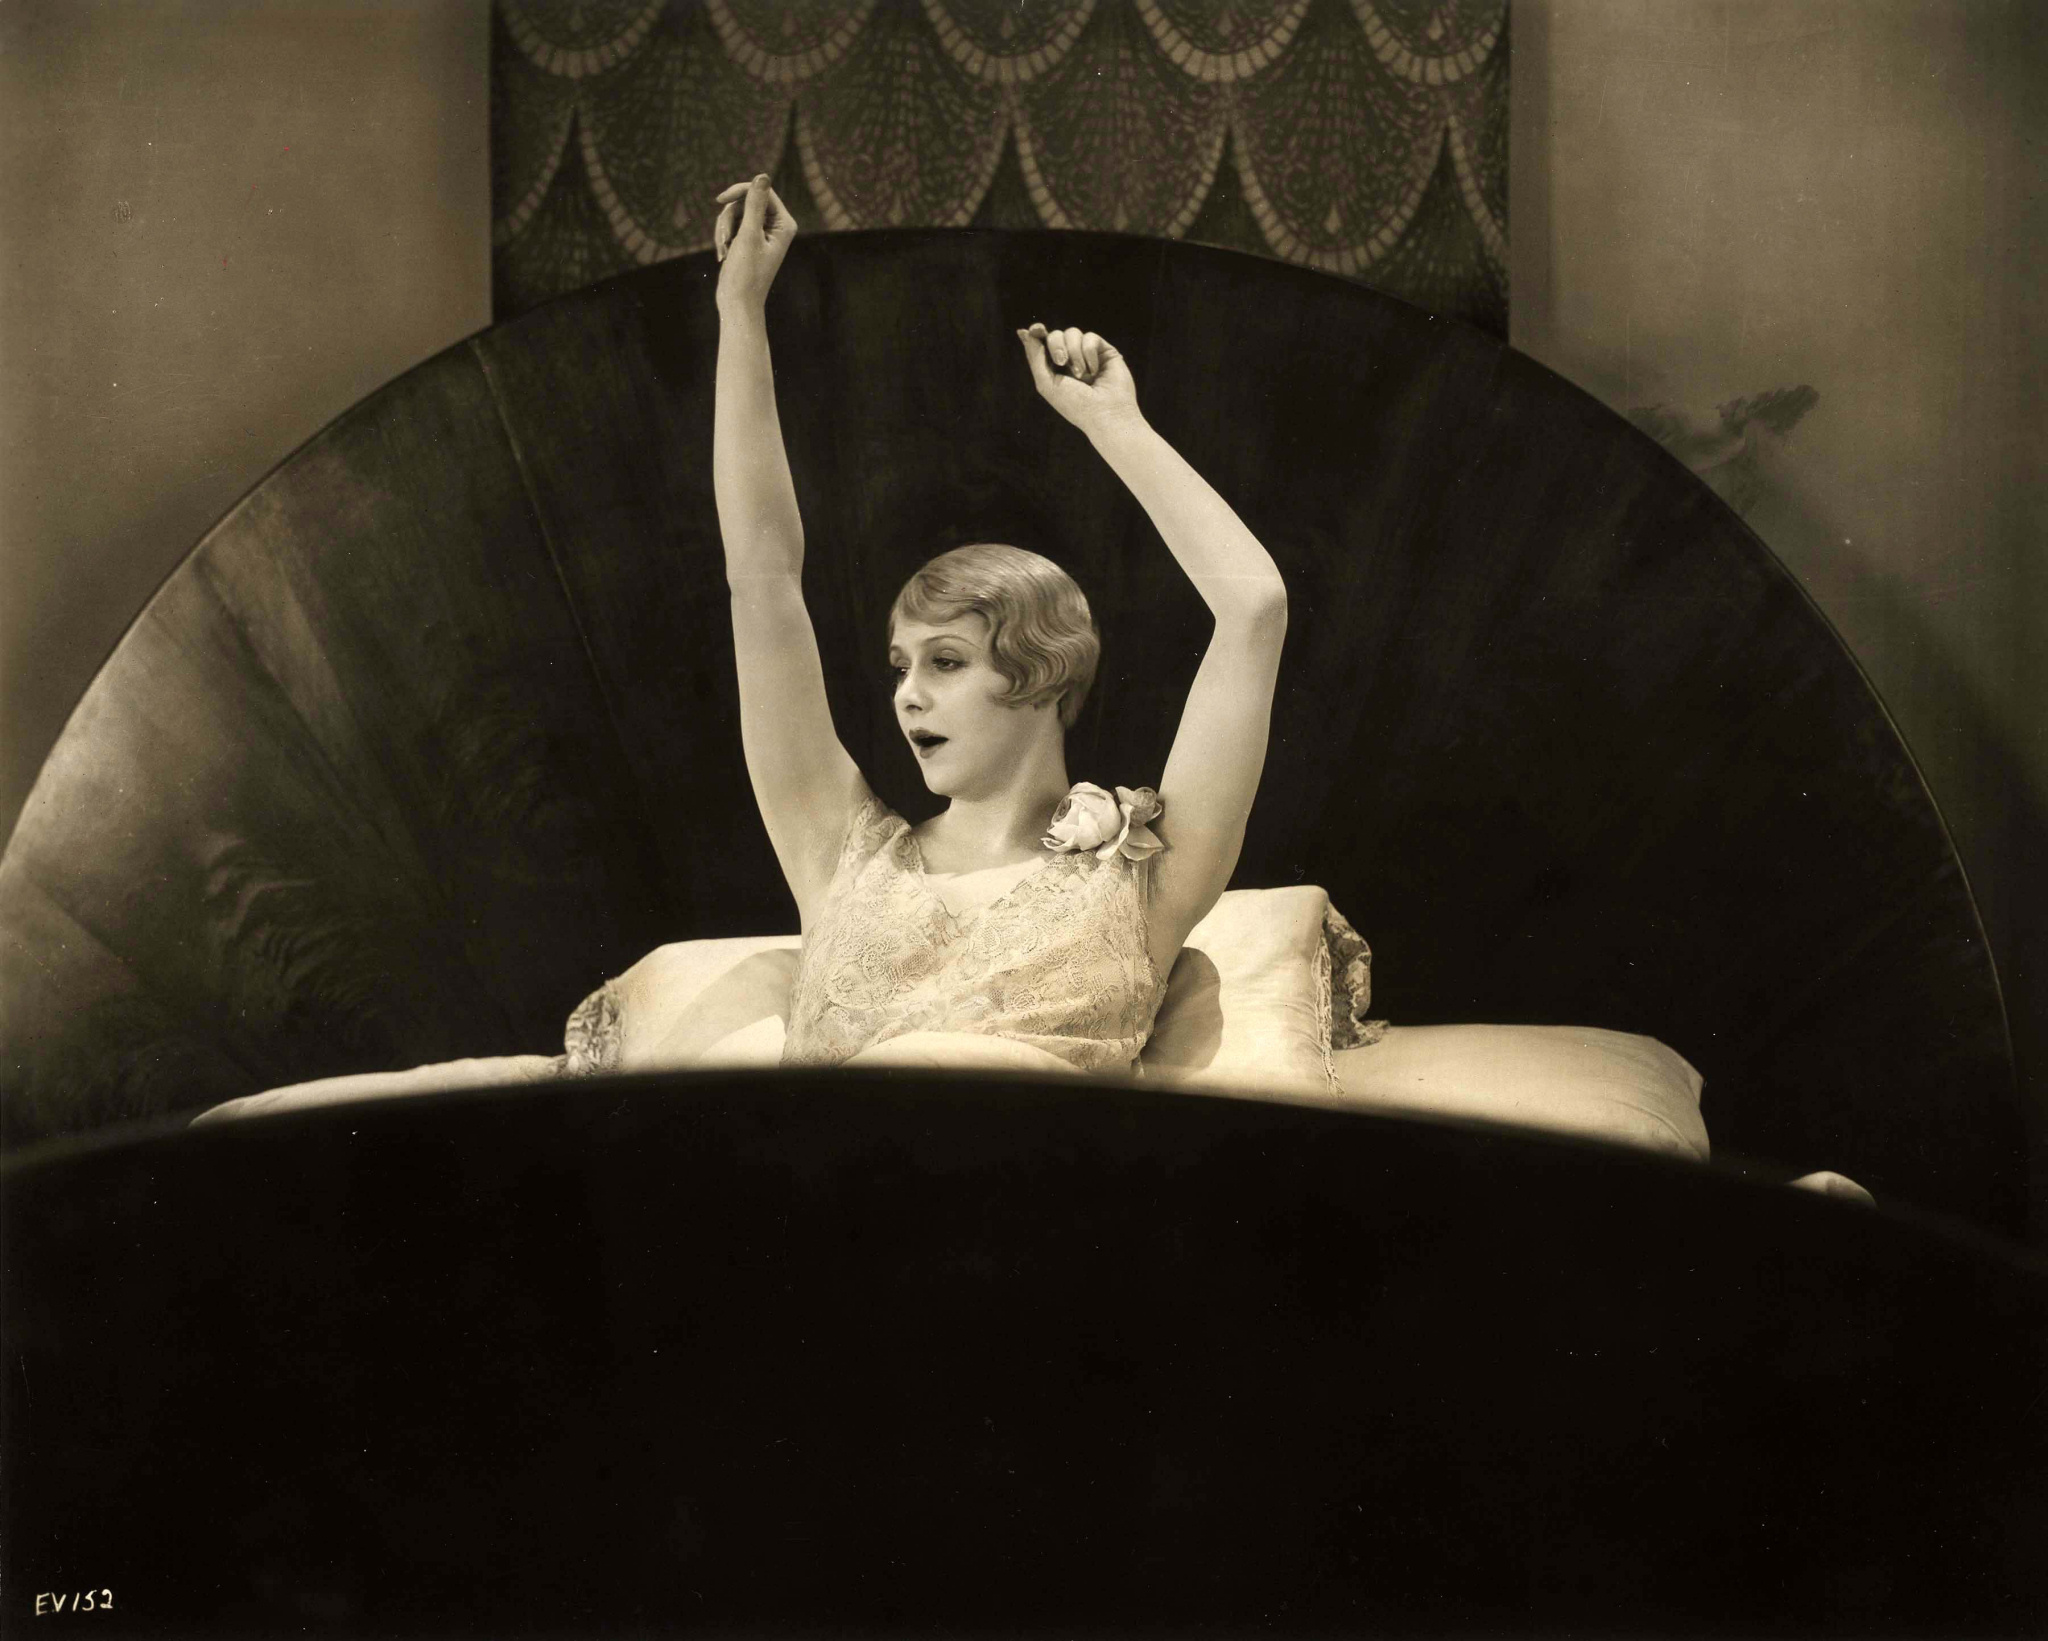 Isabel Jeans in Easy Virtue (1927, dir. Alfred Hitchcock)